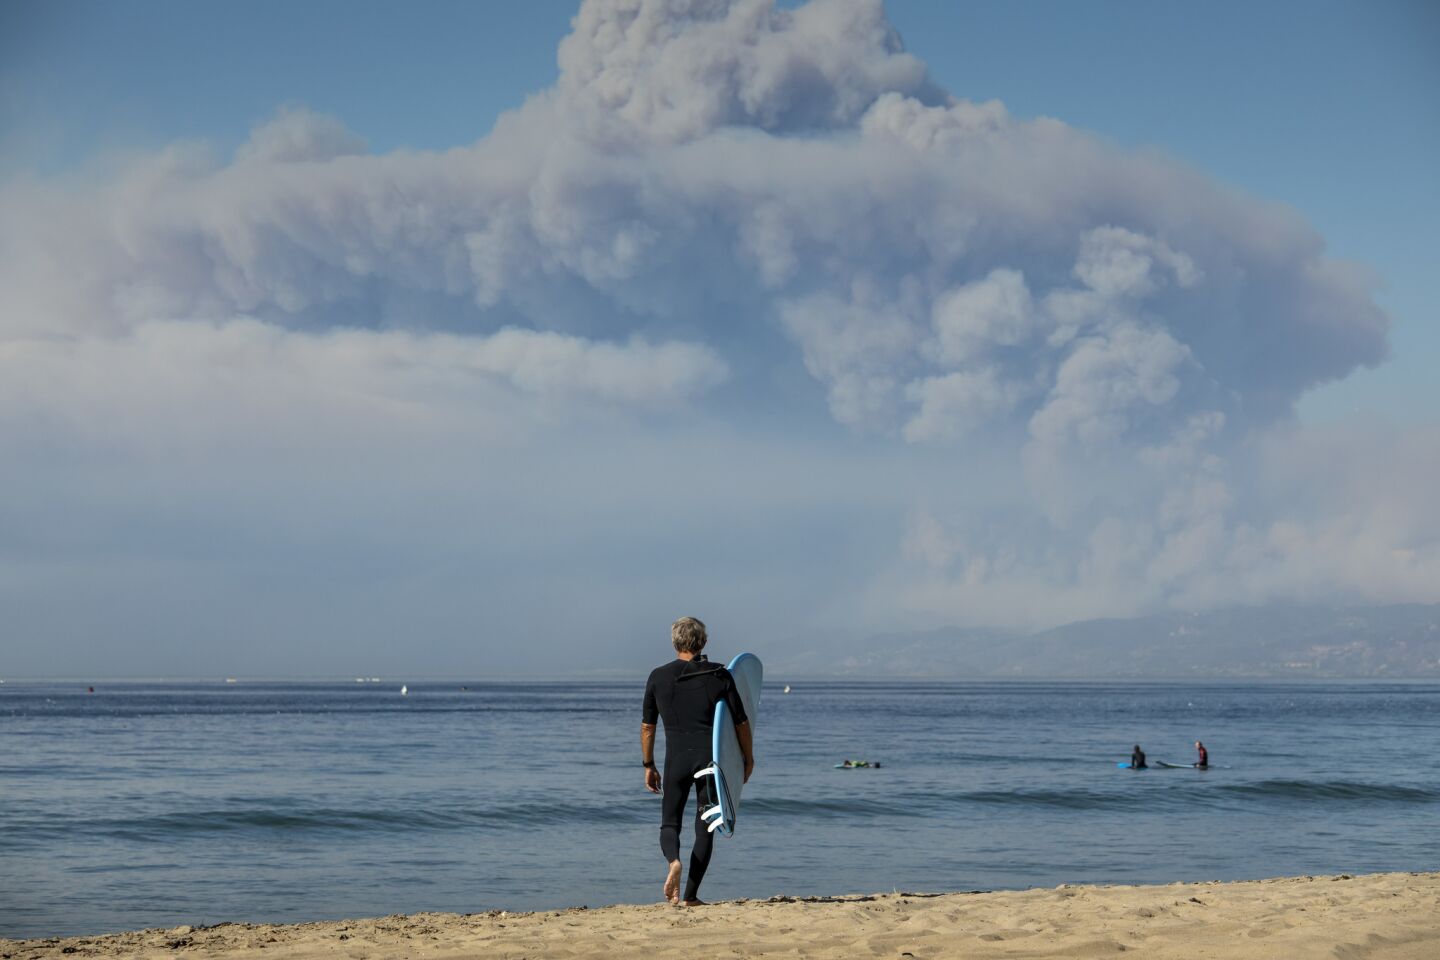 Michael Quane of El Segundo came to the El Porto area of Manhattan Beach to surf against the backdrop of billowing smoke from the Woolsey fire over Santa Monica.